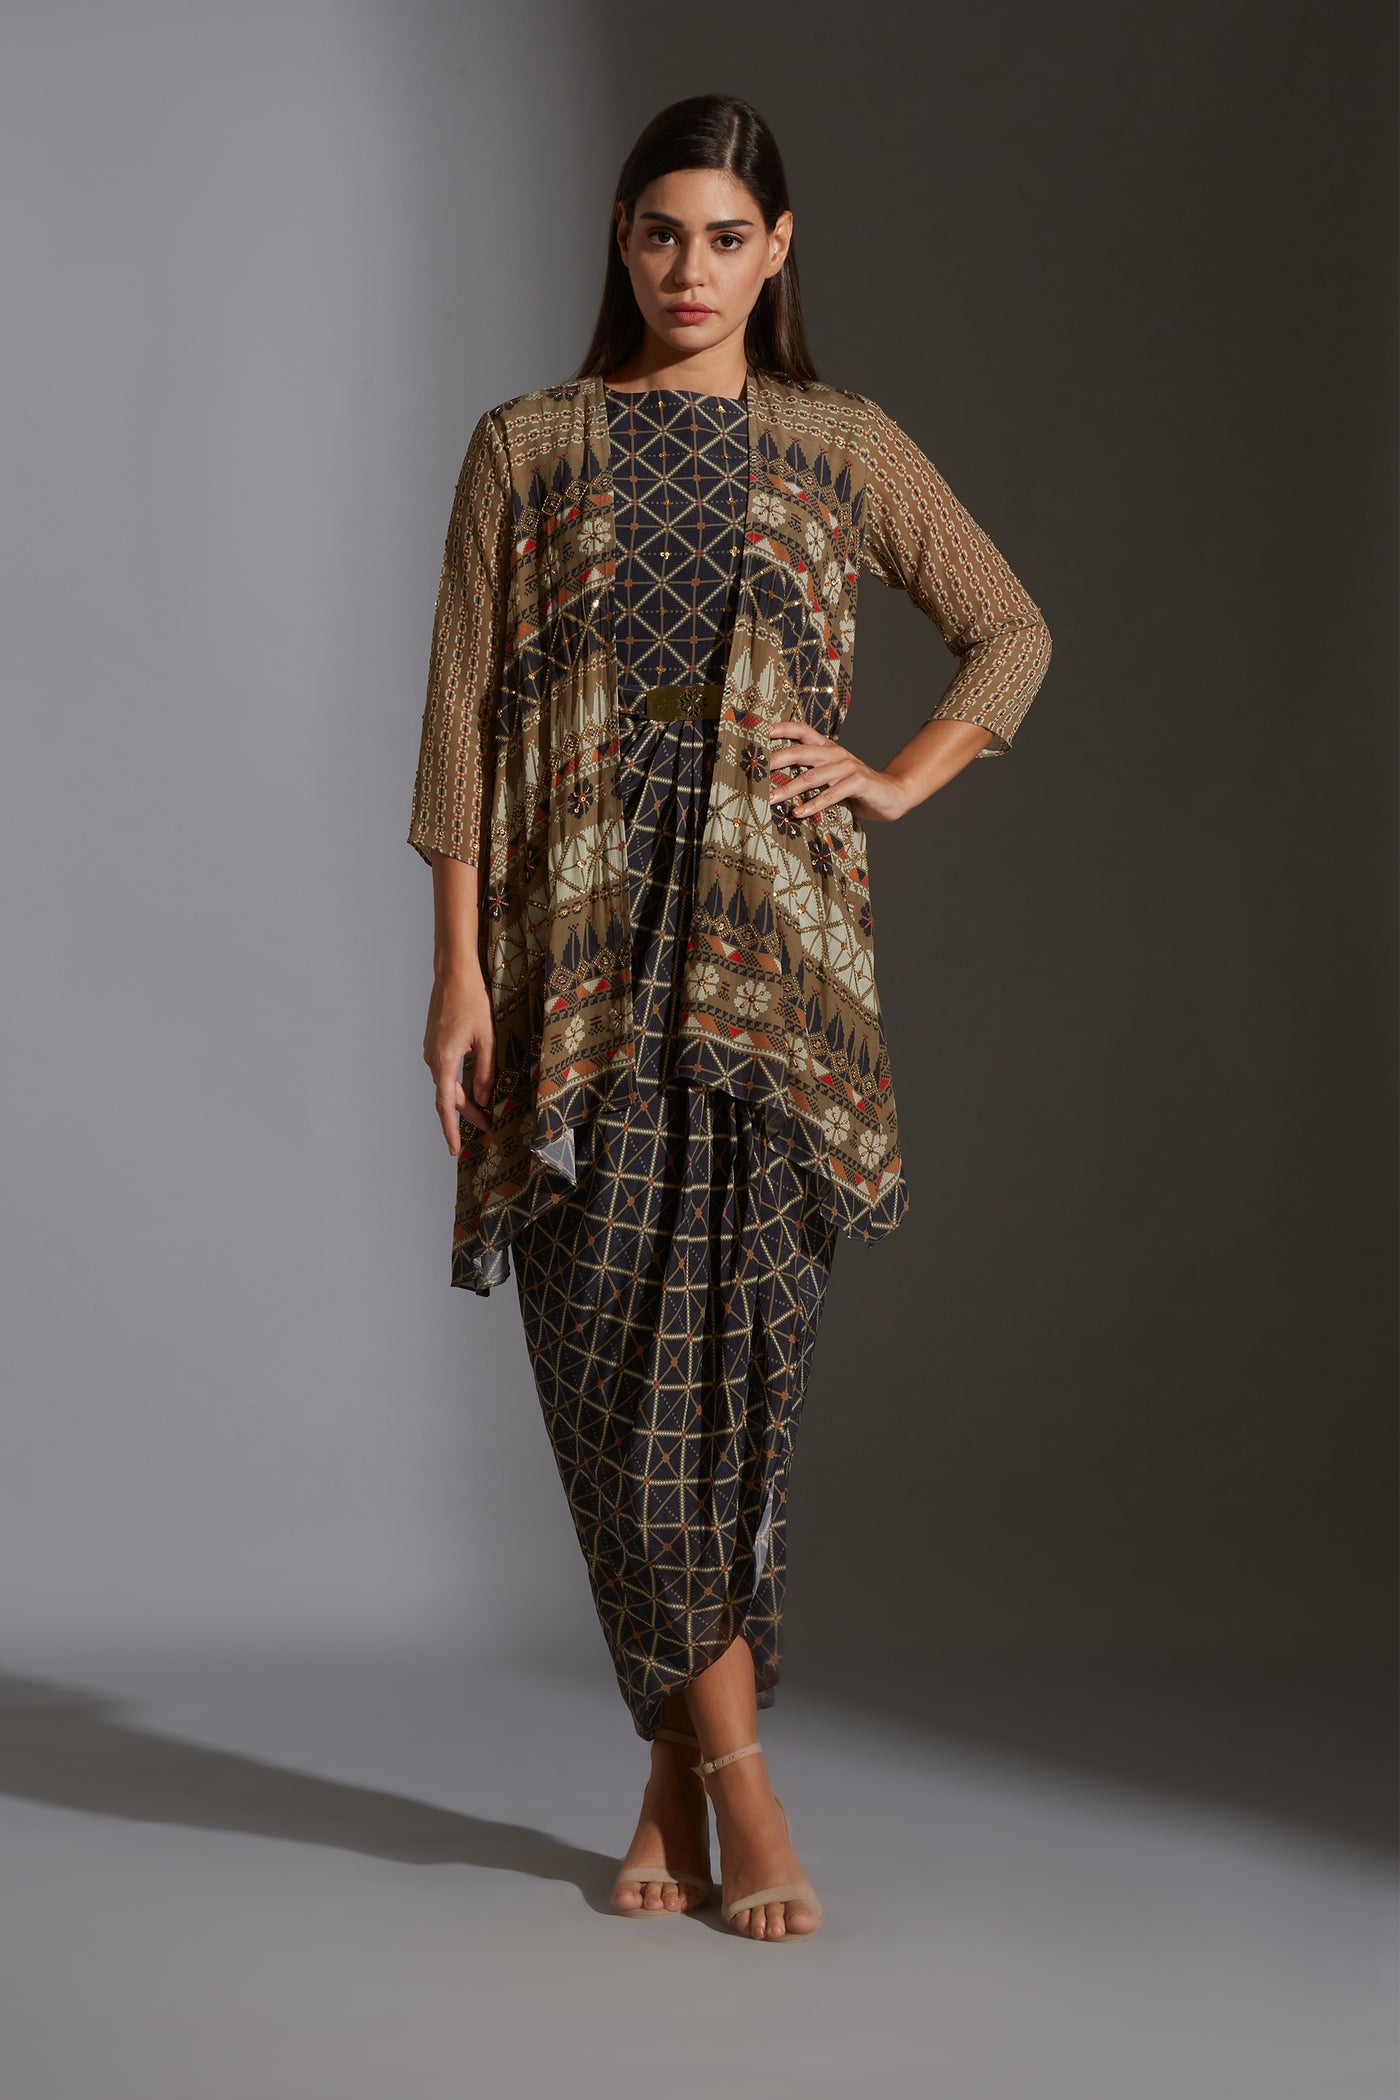 sougat paul Printed dhoti dress with side cuts paired with printed jacket blue festive fusion indian designer wear online shopping melange singapore